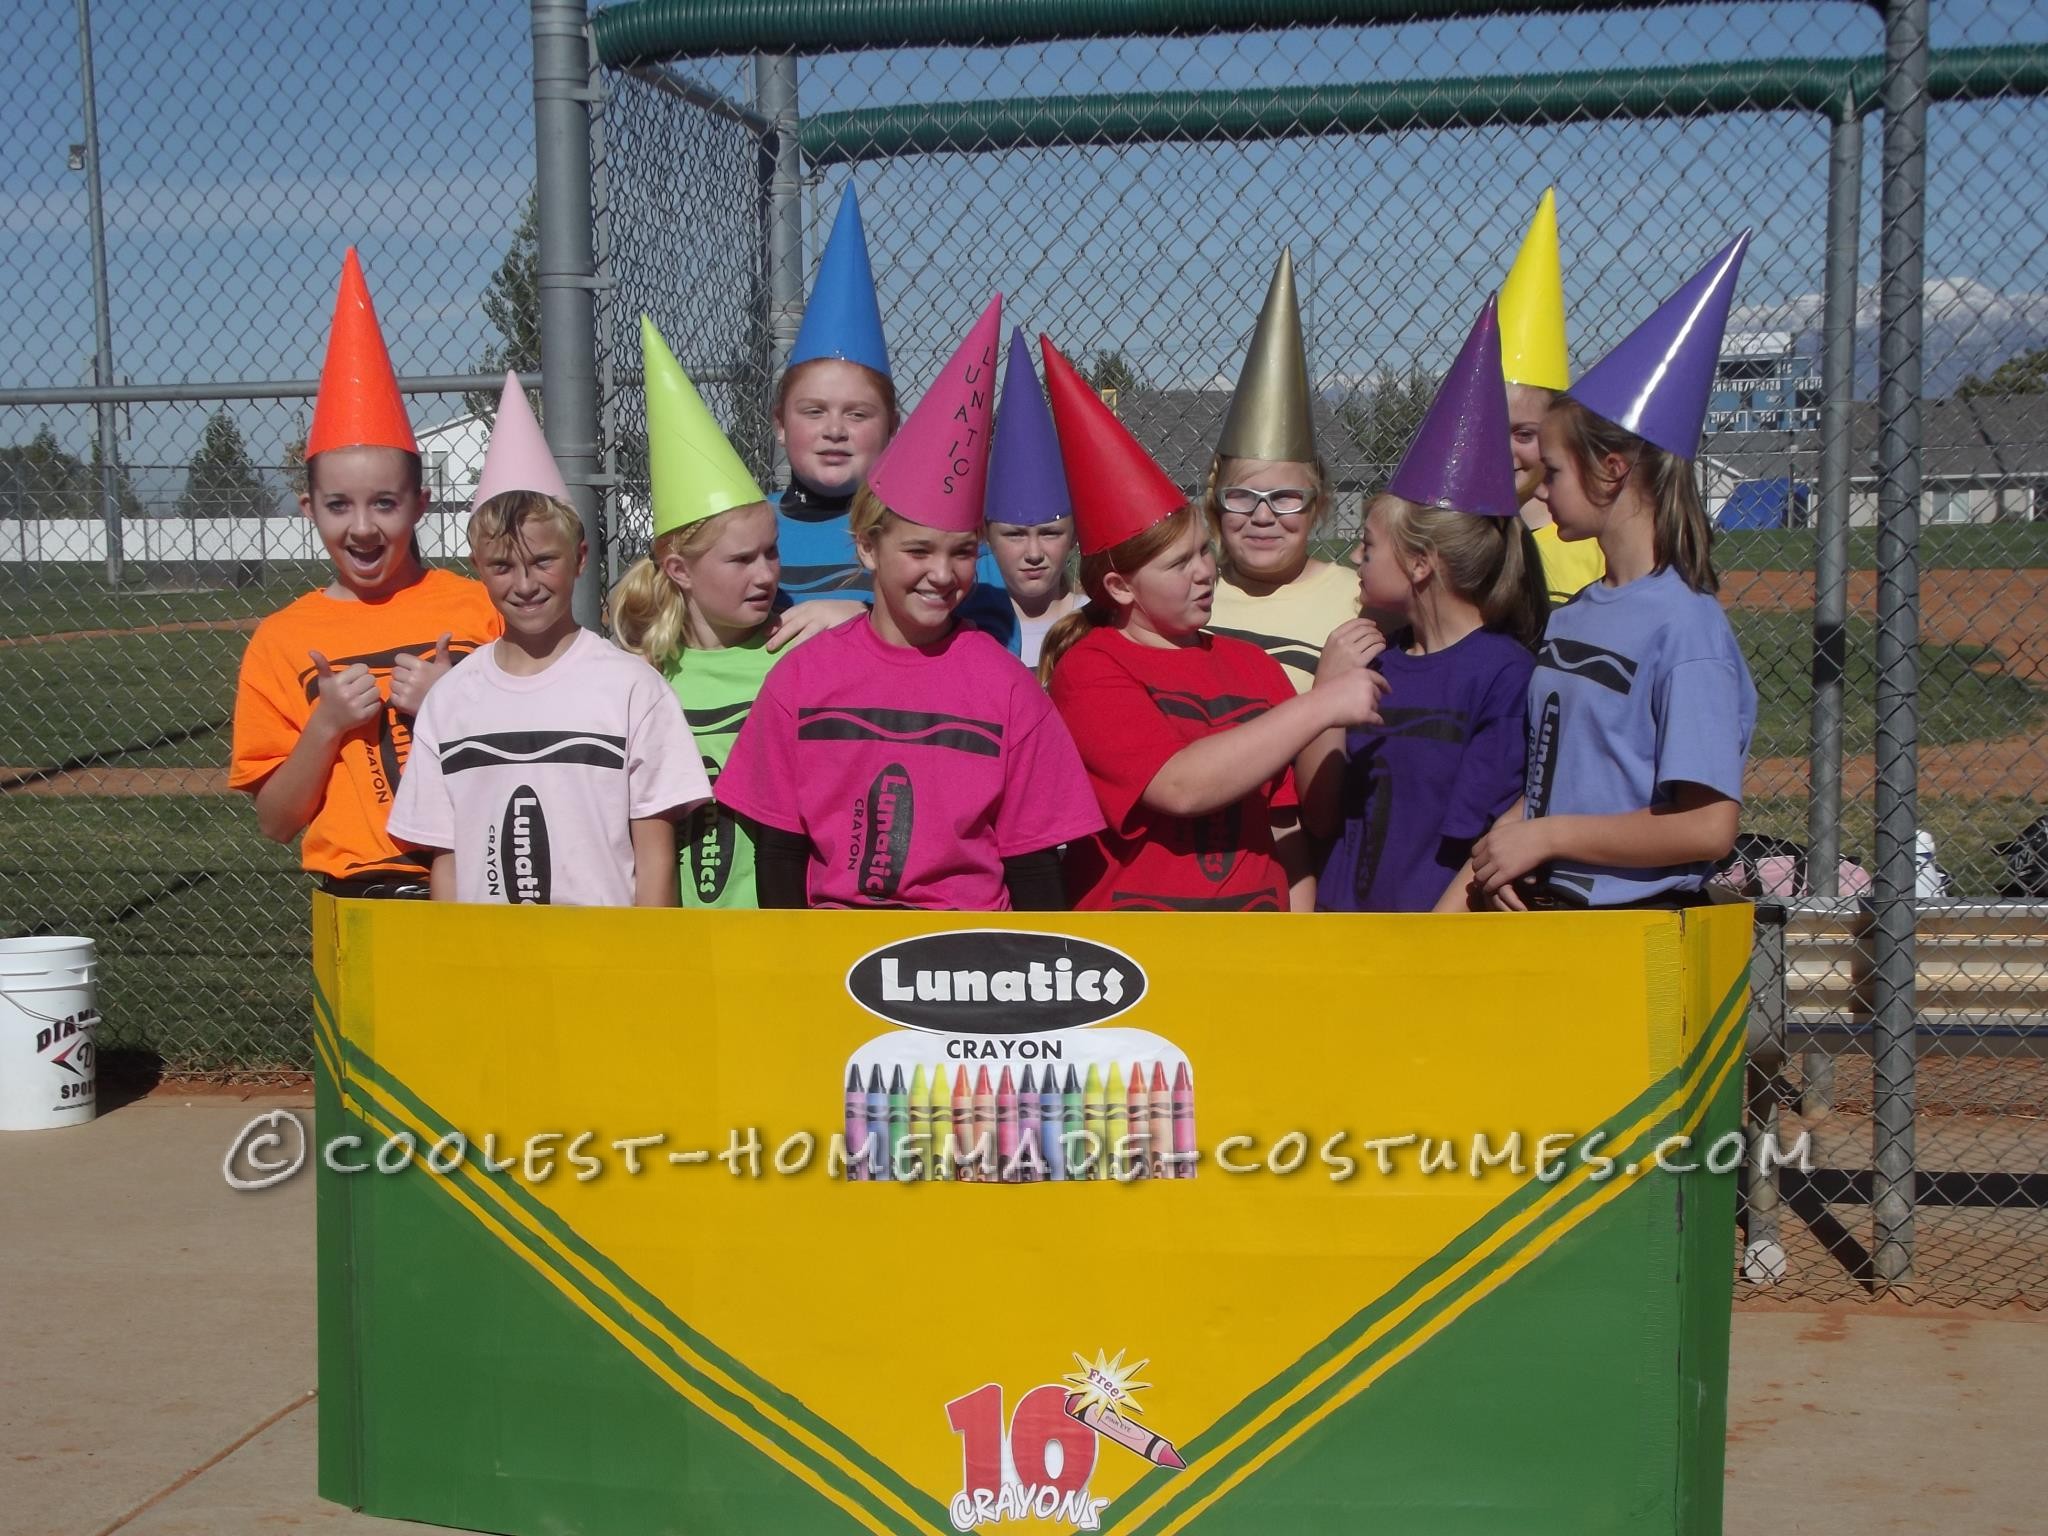 This was half homemade.  Our 12 and 13 year old LUNATICS softball team played a Halloween tournament dressed as "Lunatics" brand crayons.